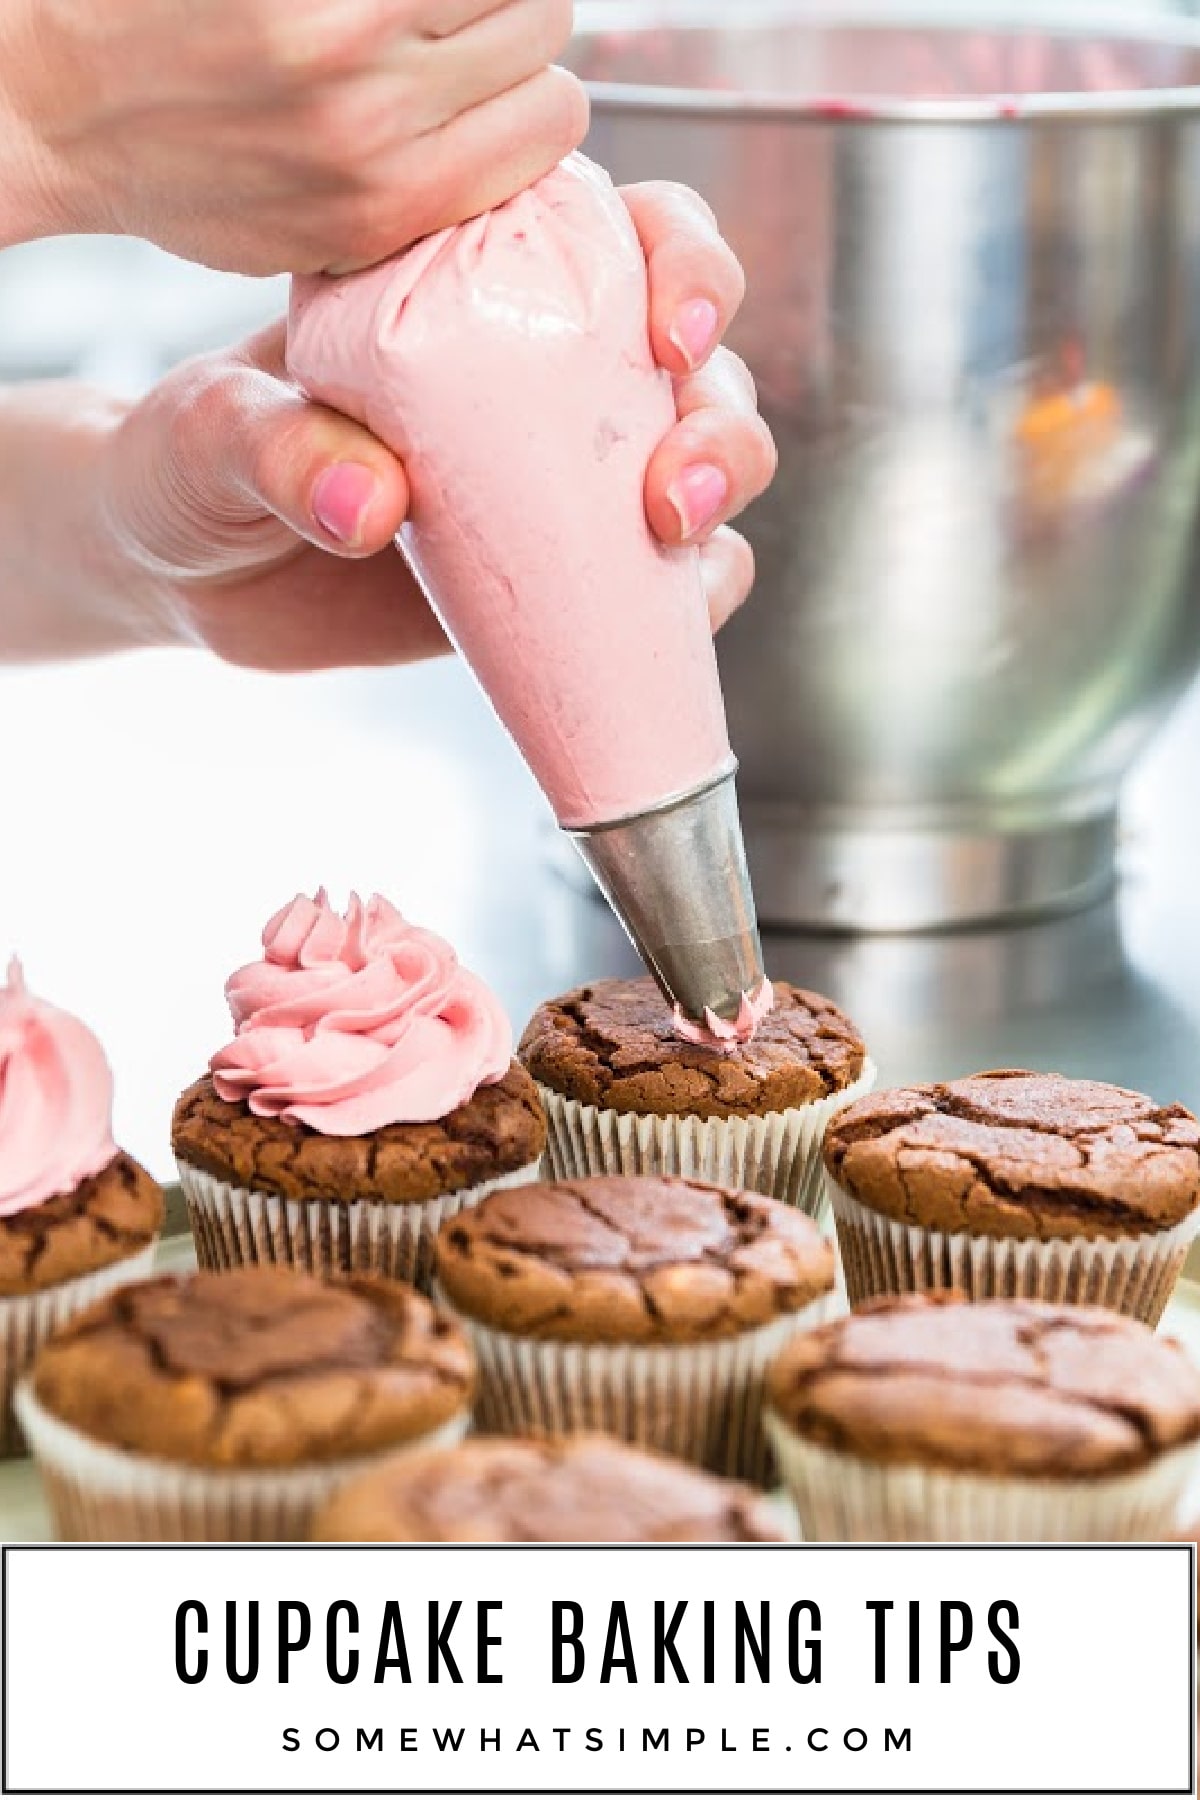 Learn how to bake and decorate the perfect cupcakes with our 10 simple cupcake baking tips! via @somewhatsimple